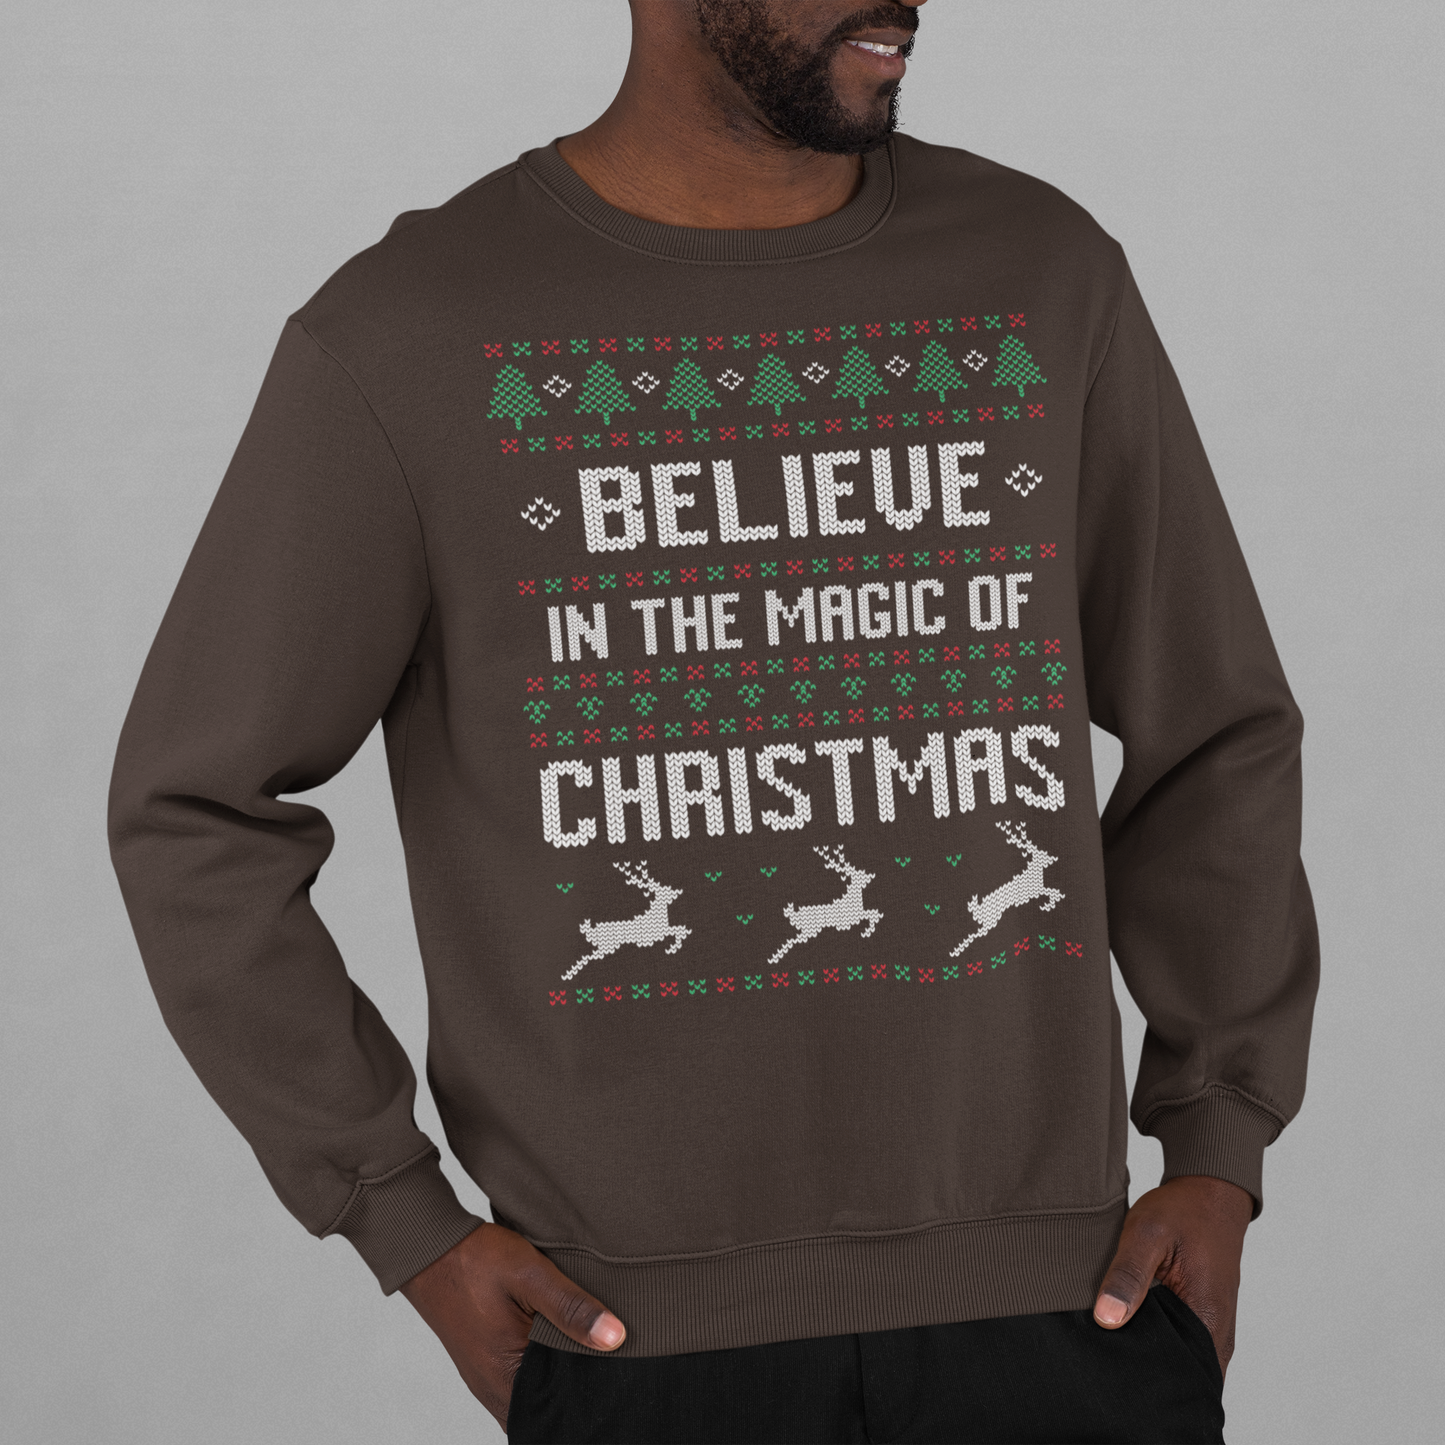 Believe In The Magic Of Christmas - Unisex Ugly Sweater, Christmas, Winter, Fall